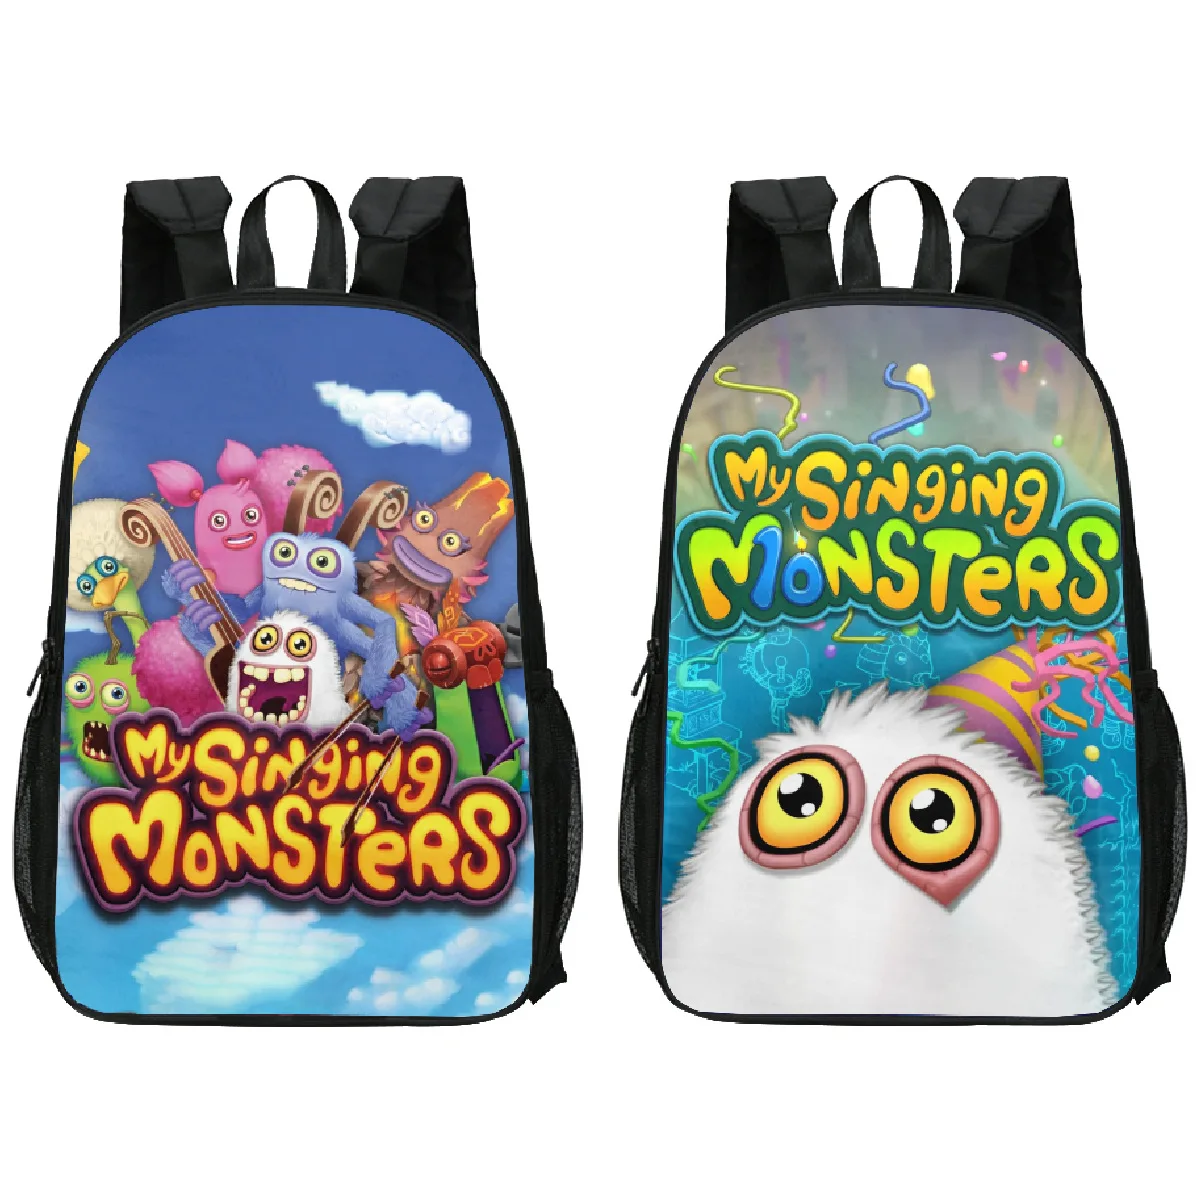 

3D New Double-sided Printing My Singing Monsters Monster Concert Schoolbag Backpack for Primary and Secondary School Students